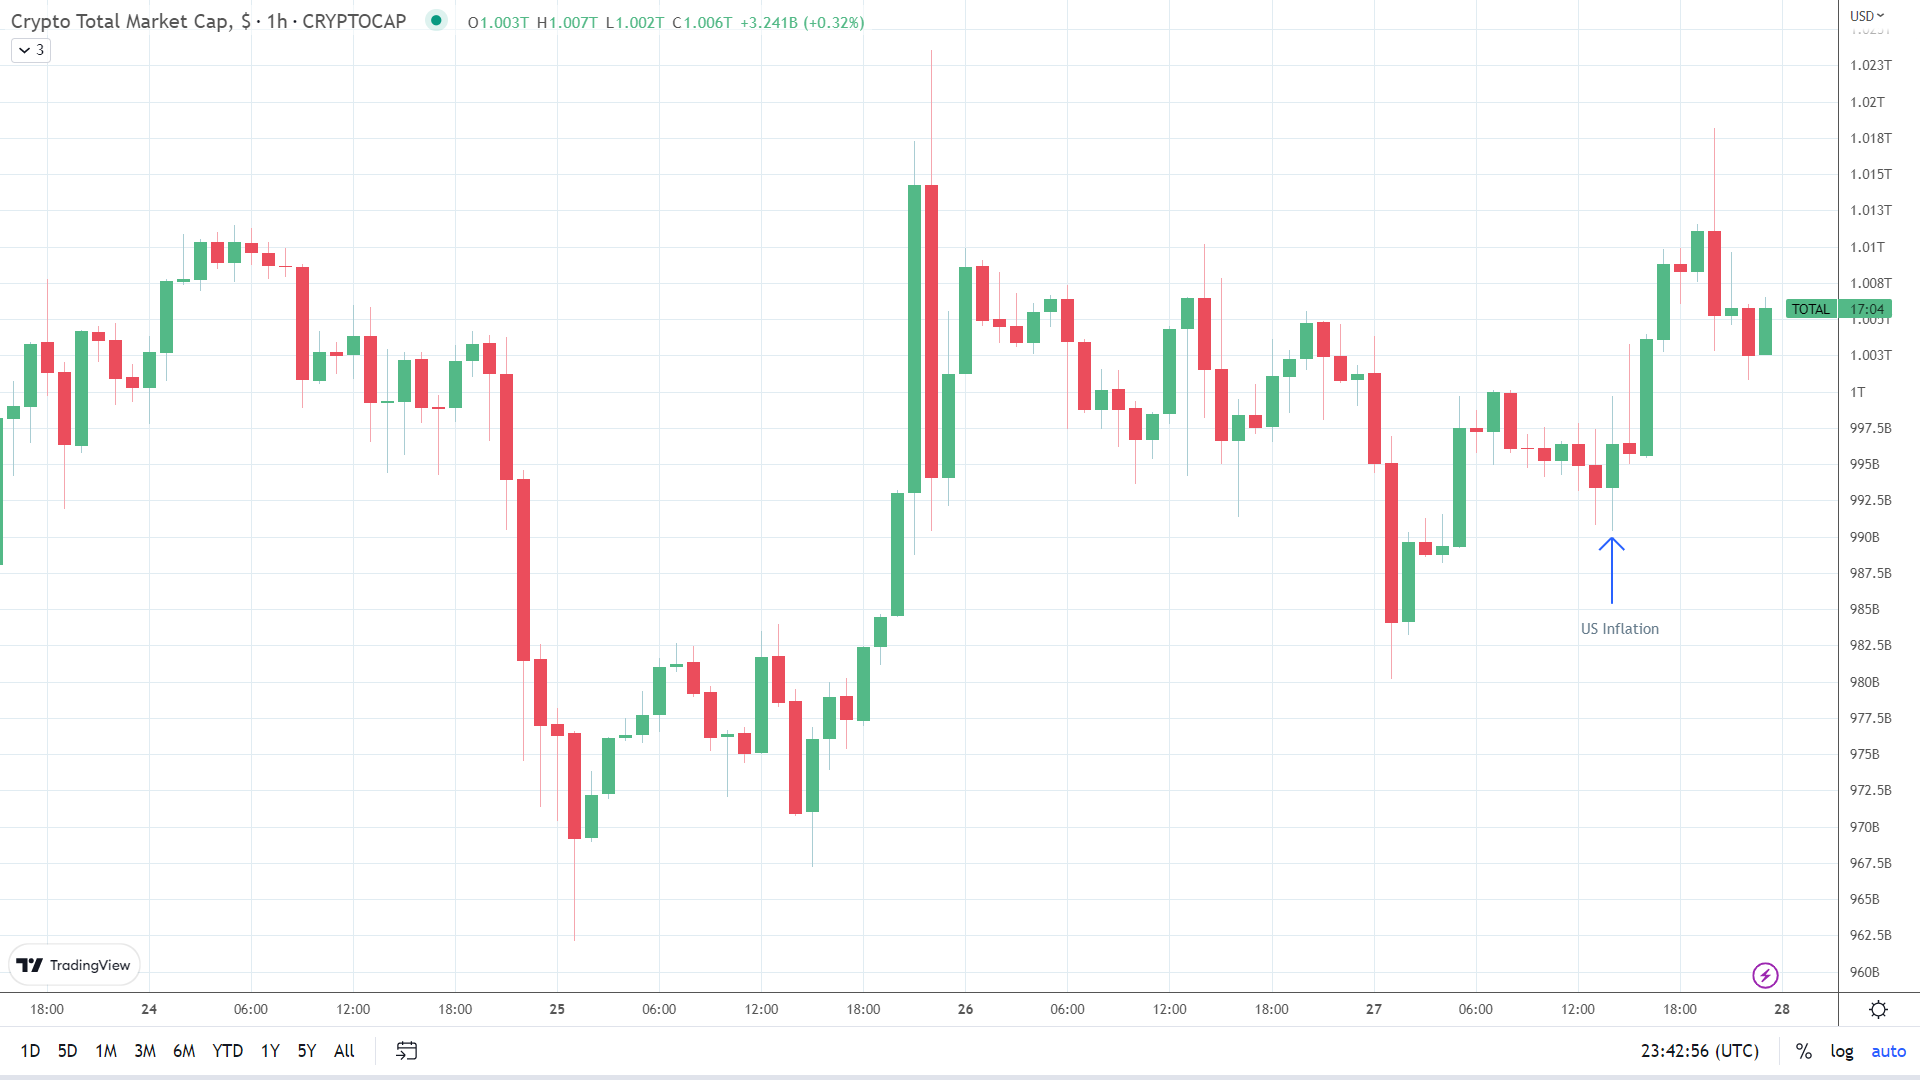 Crypto market finds US inflation support.